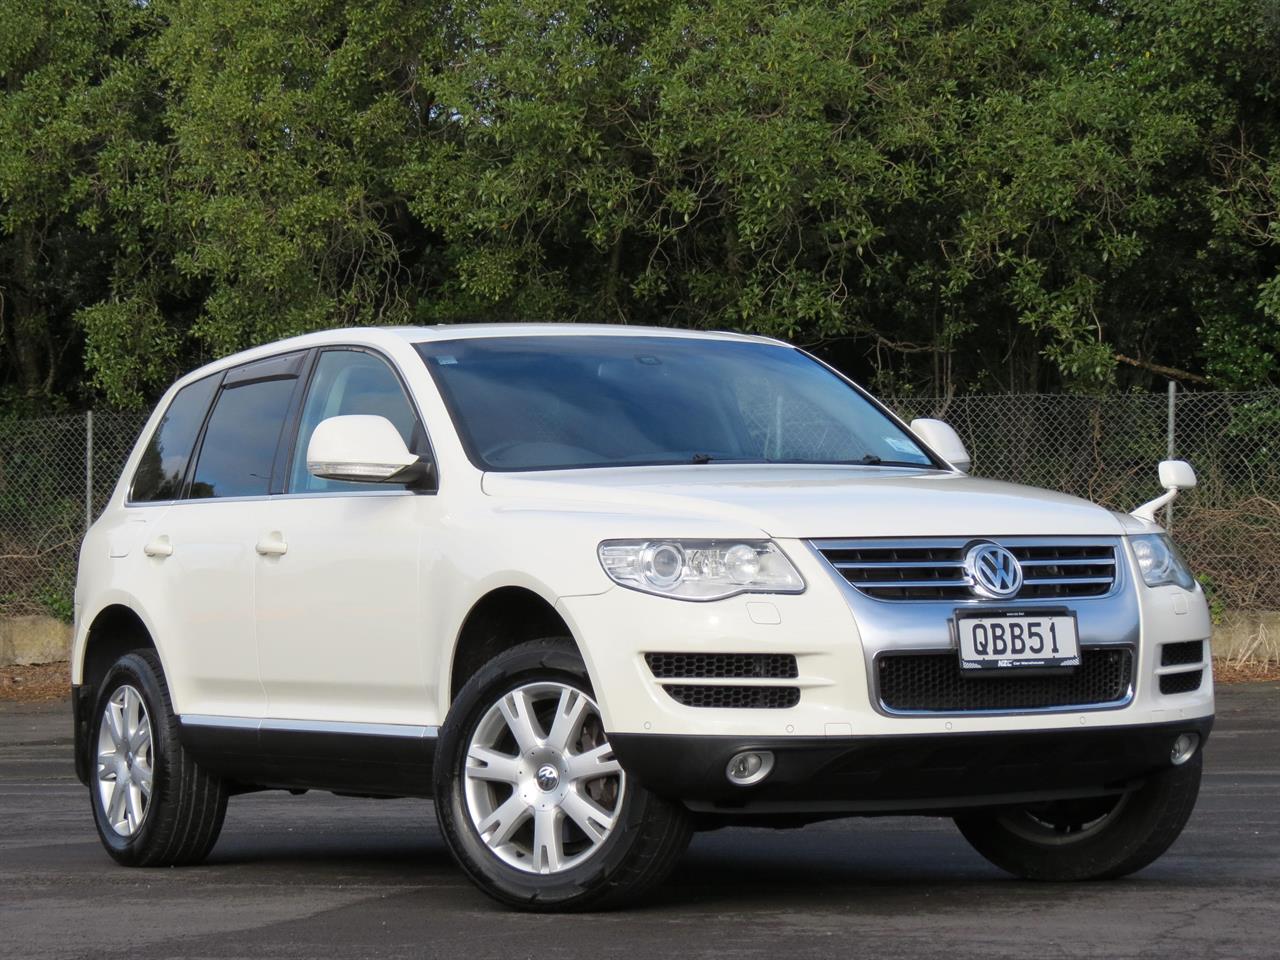 NZC 2007 Volkswagen Touareg just arrived to Auckland